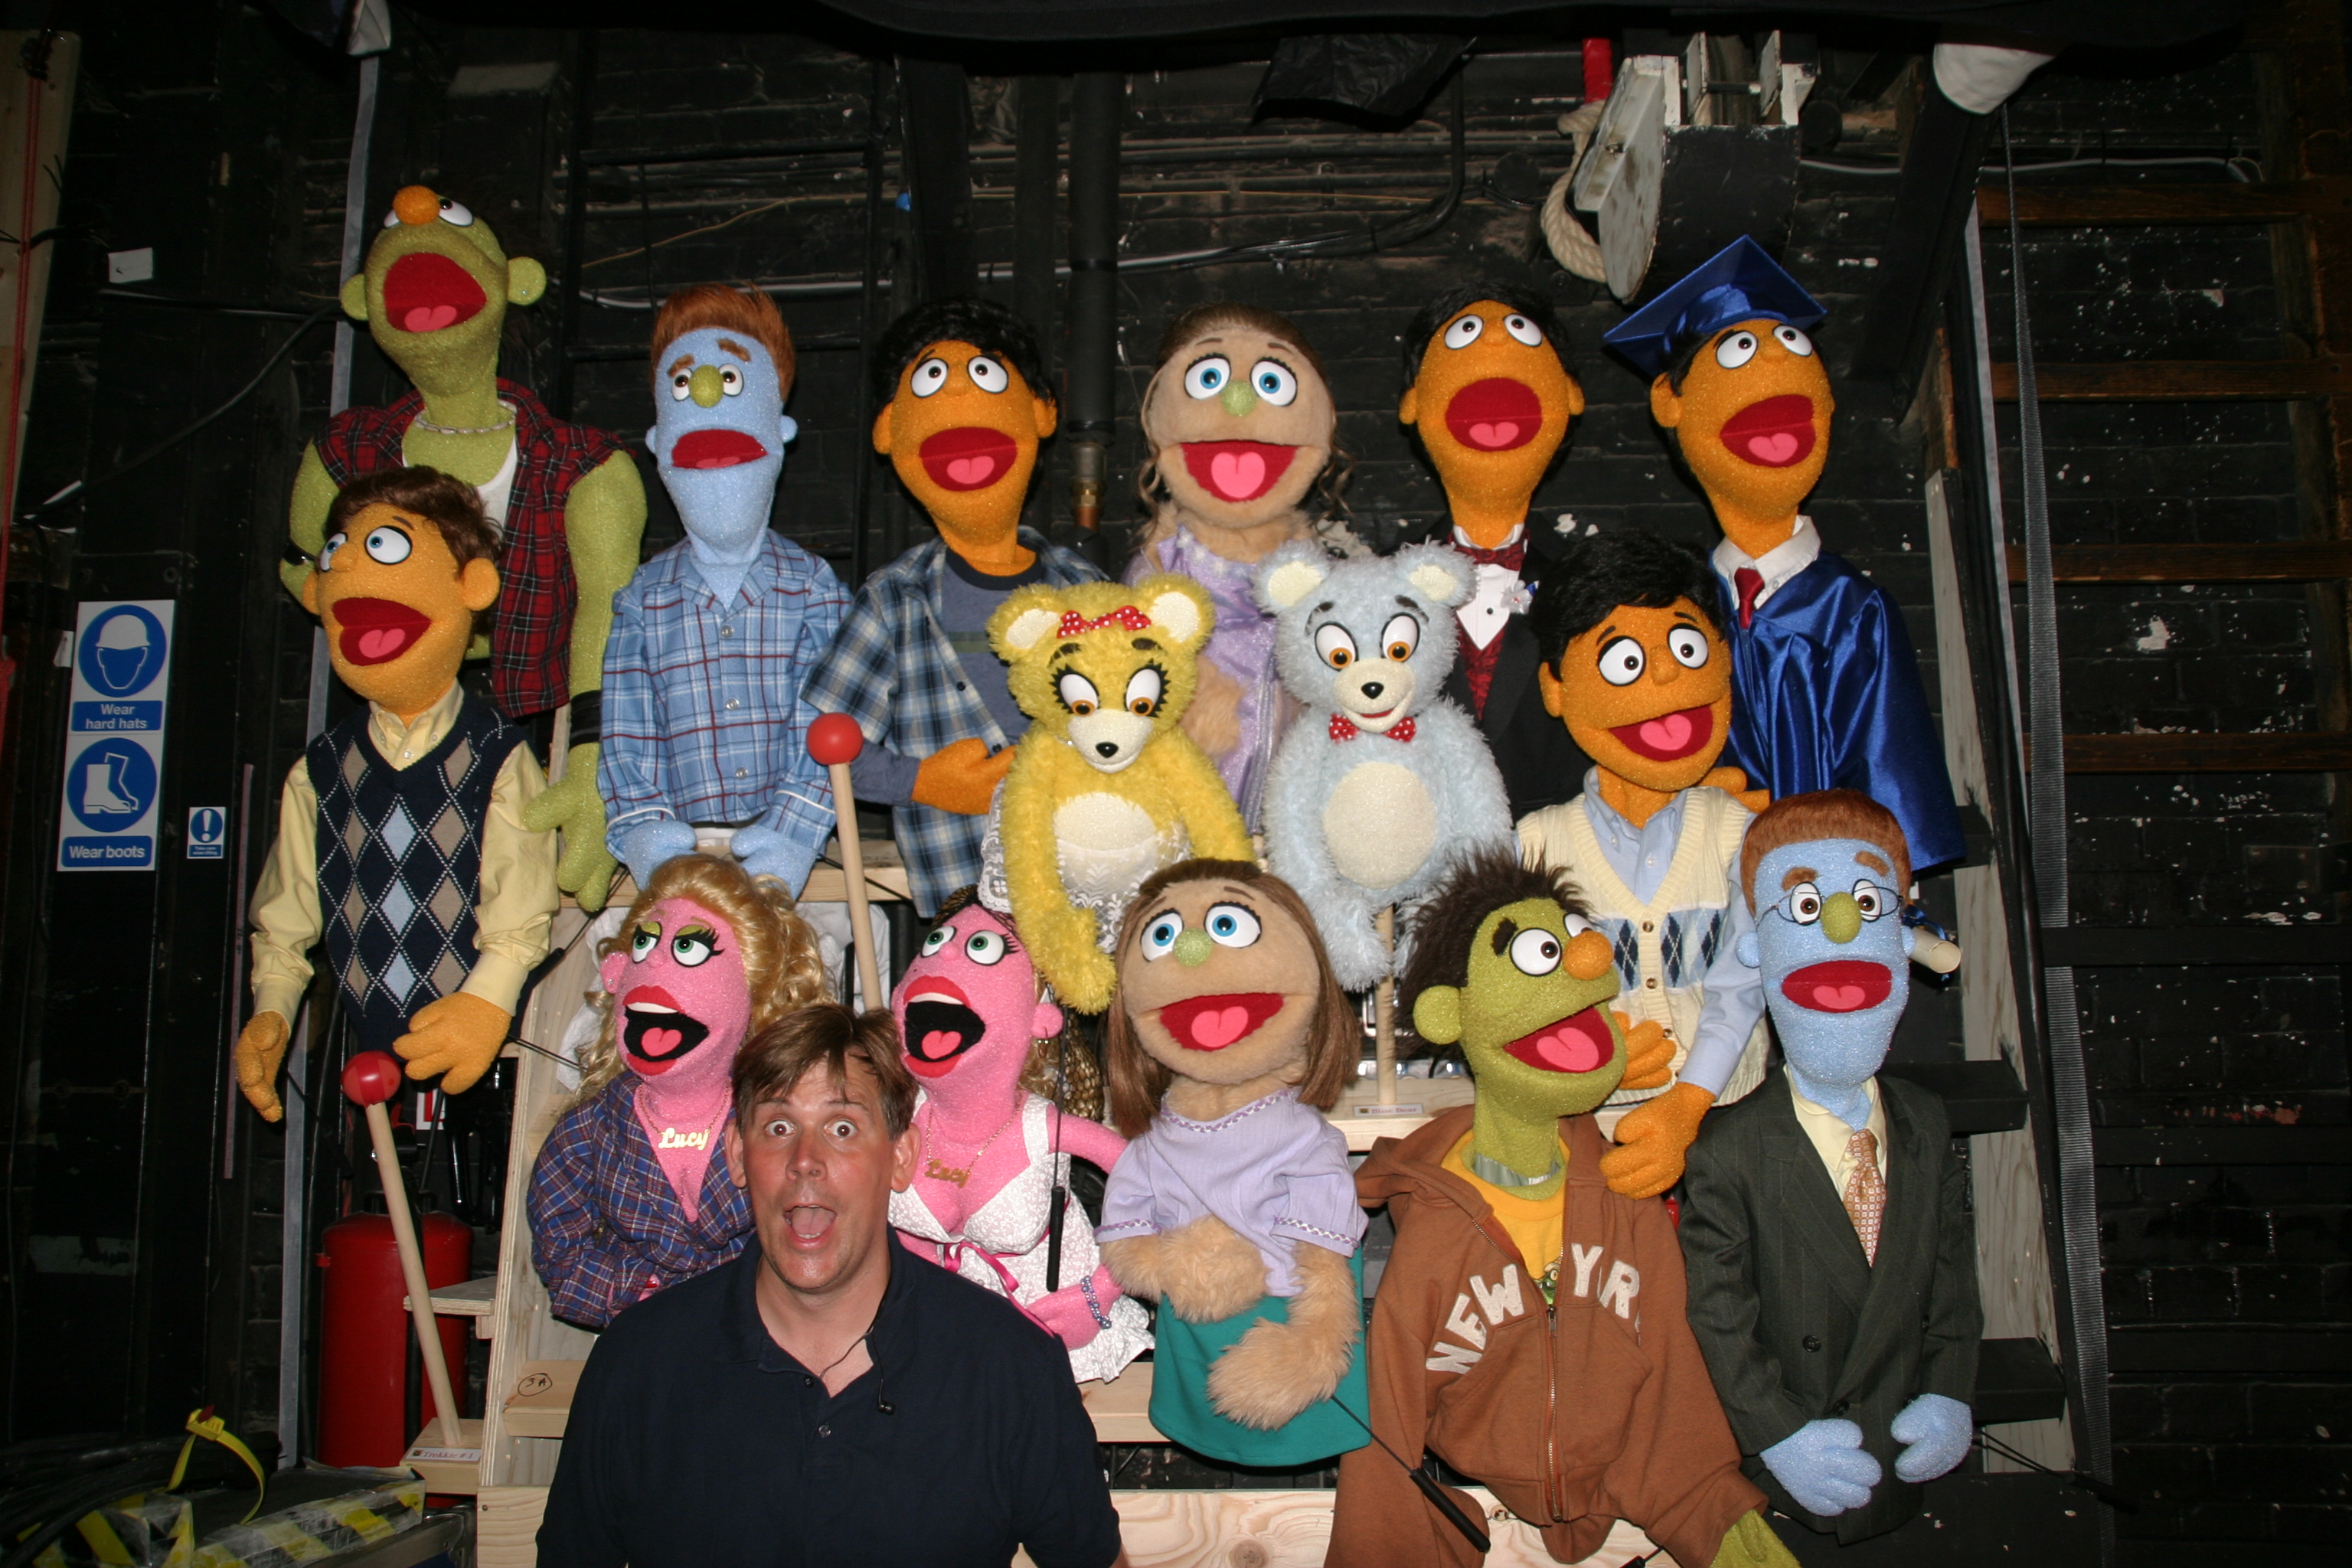 Backstage with the cast of 'Avenue Q'